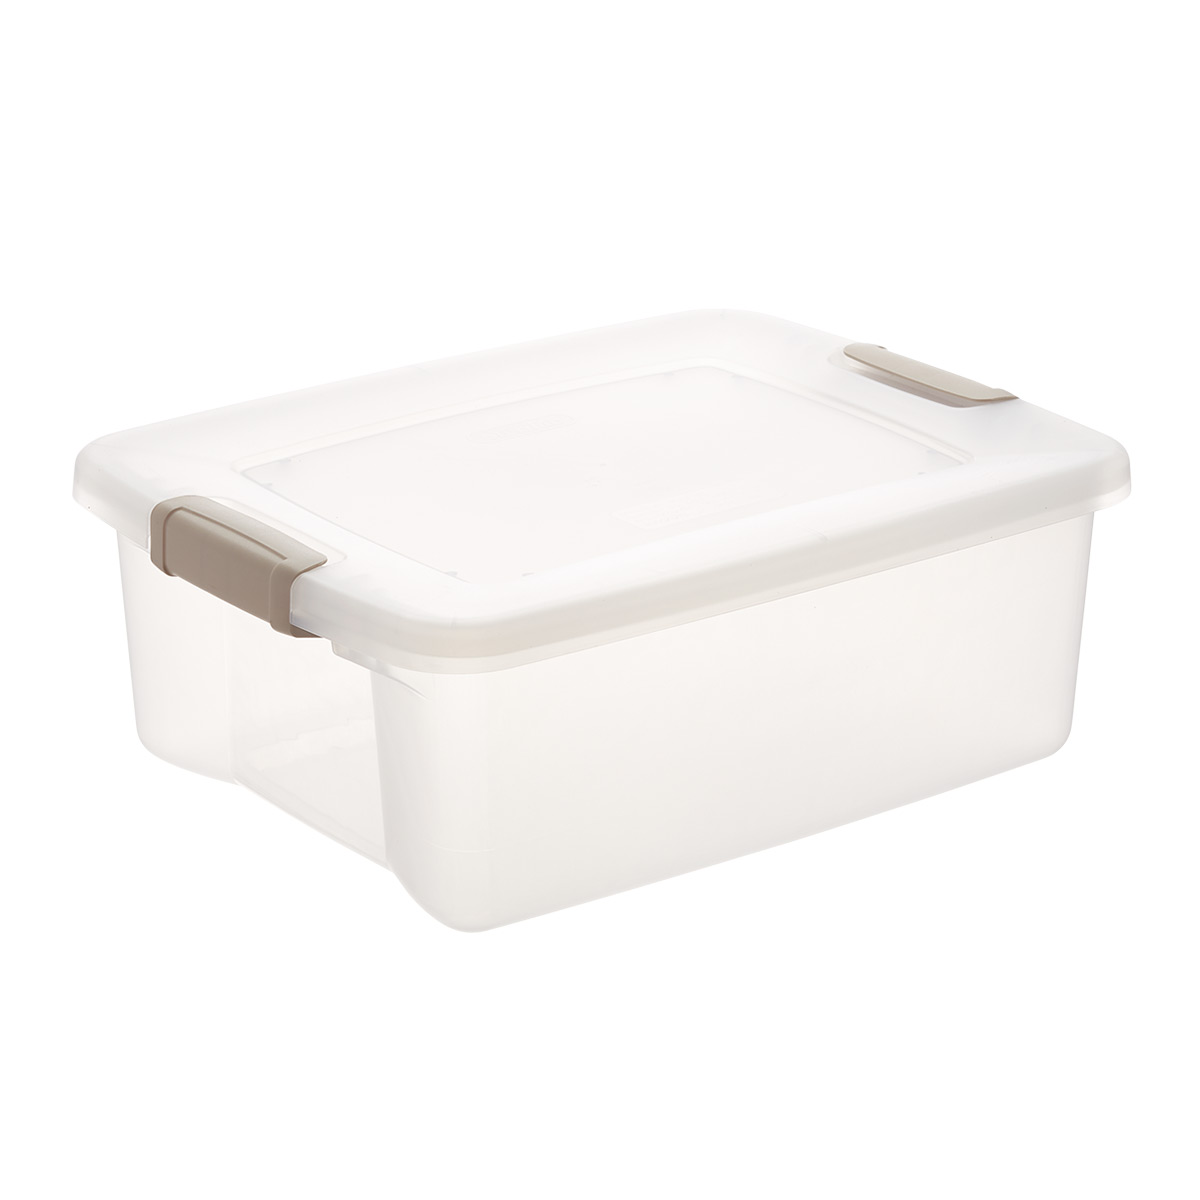 https://www.containerstore.com/catalogimages/365779/10048967-garage-tote-25qt.jpg